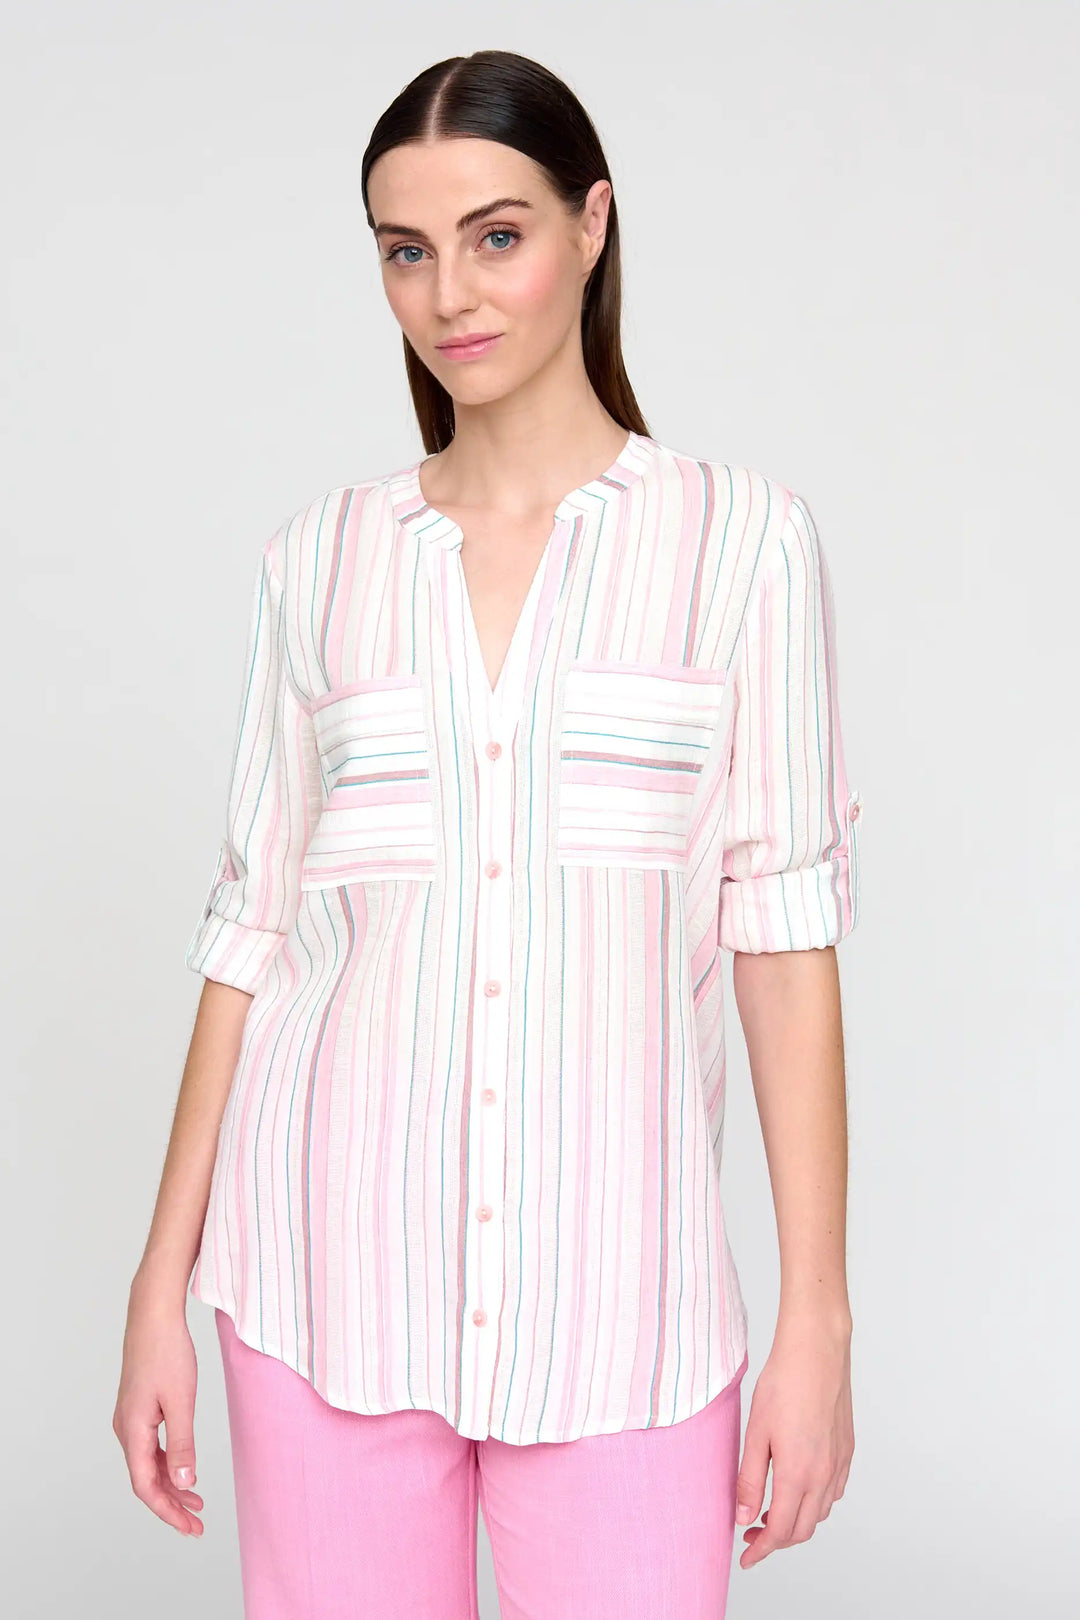 Model in 'Panela' style blouse featuring pastel vertical stripes and full-length sleeves buttoned up to a 3/4 length, complemented by light pink trousers.